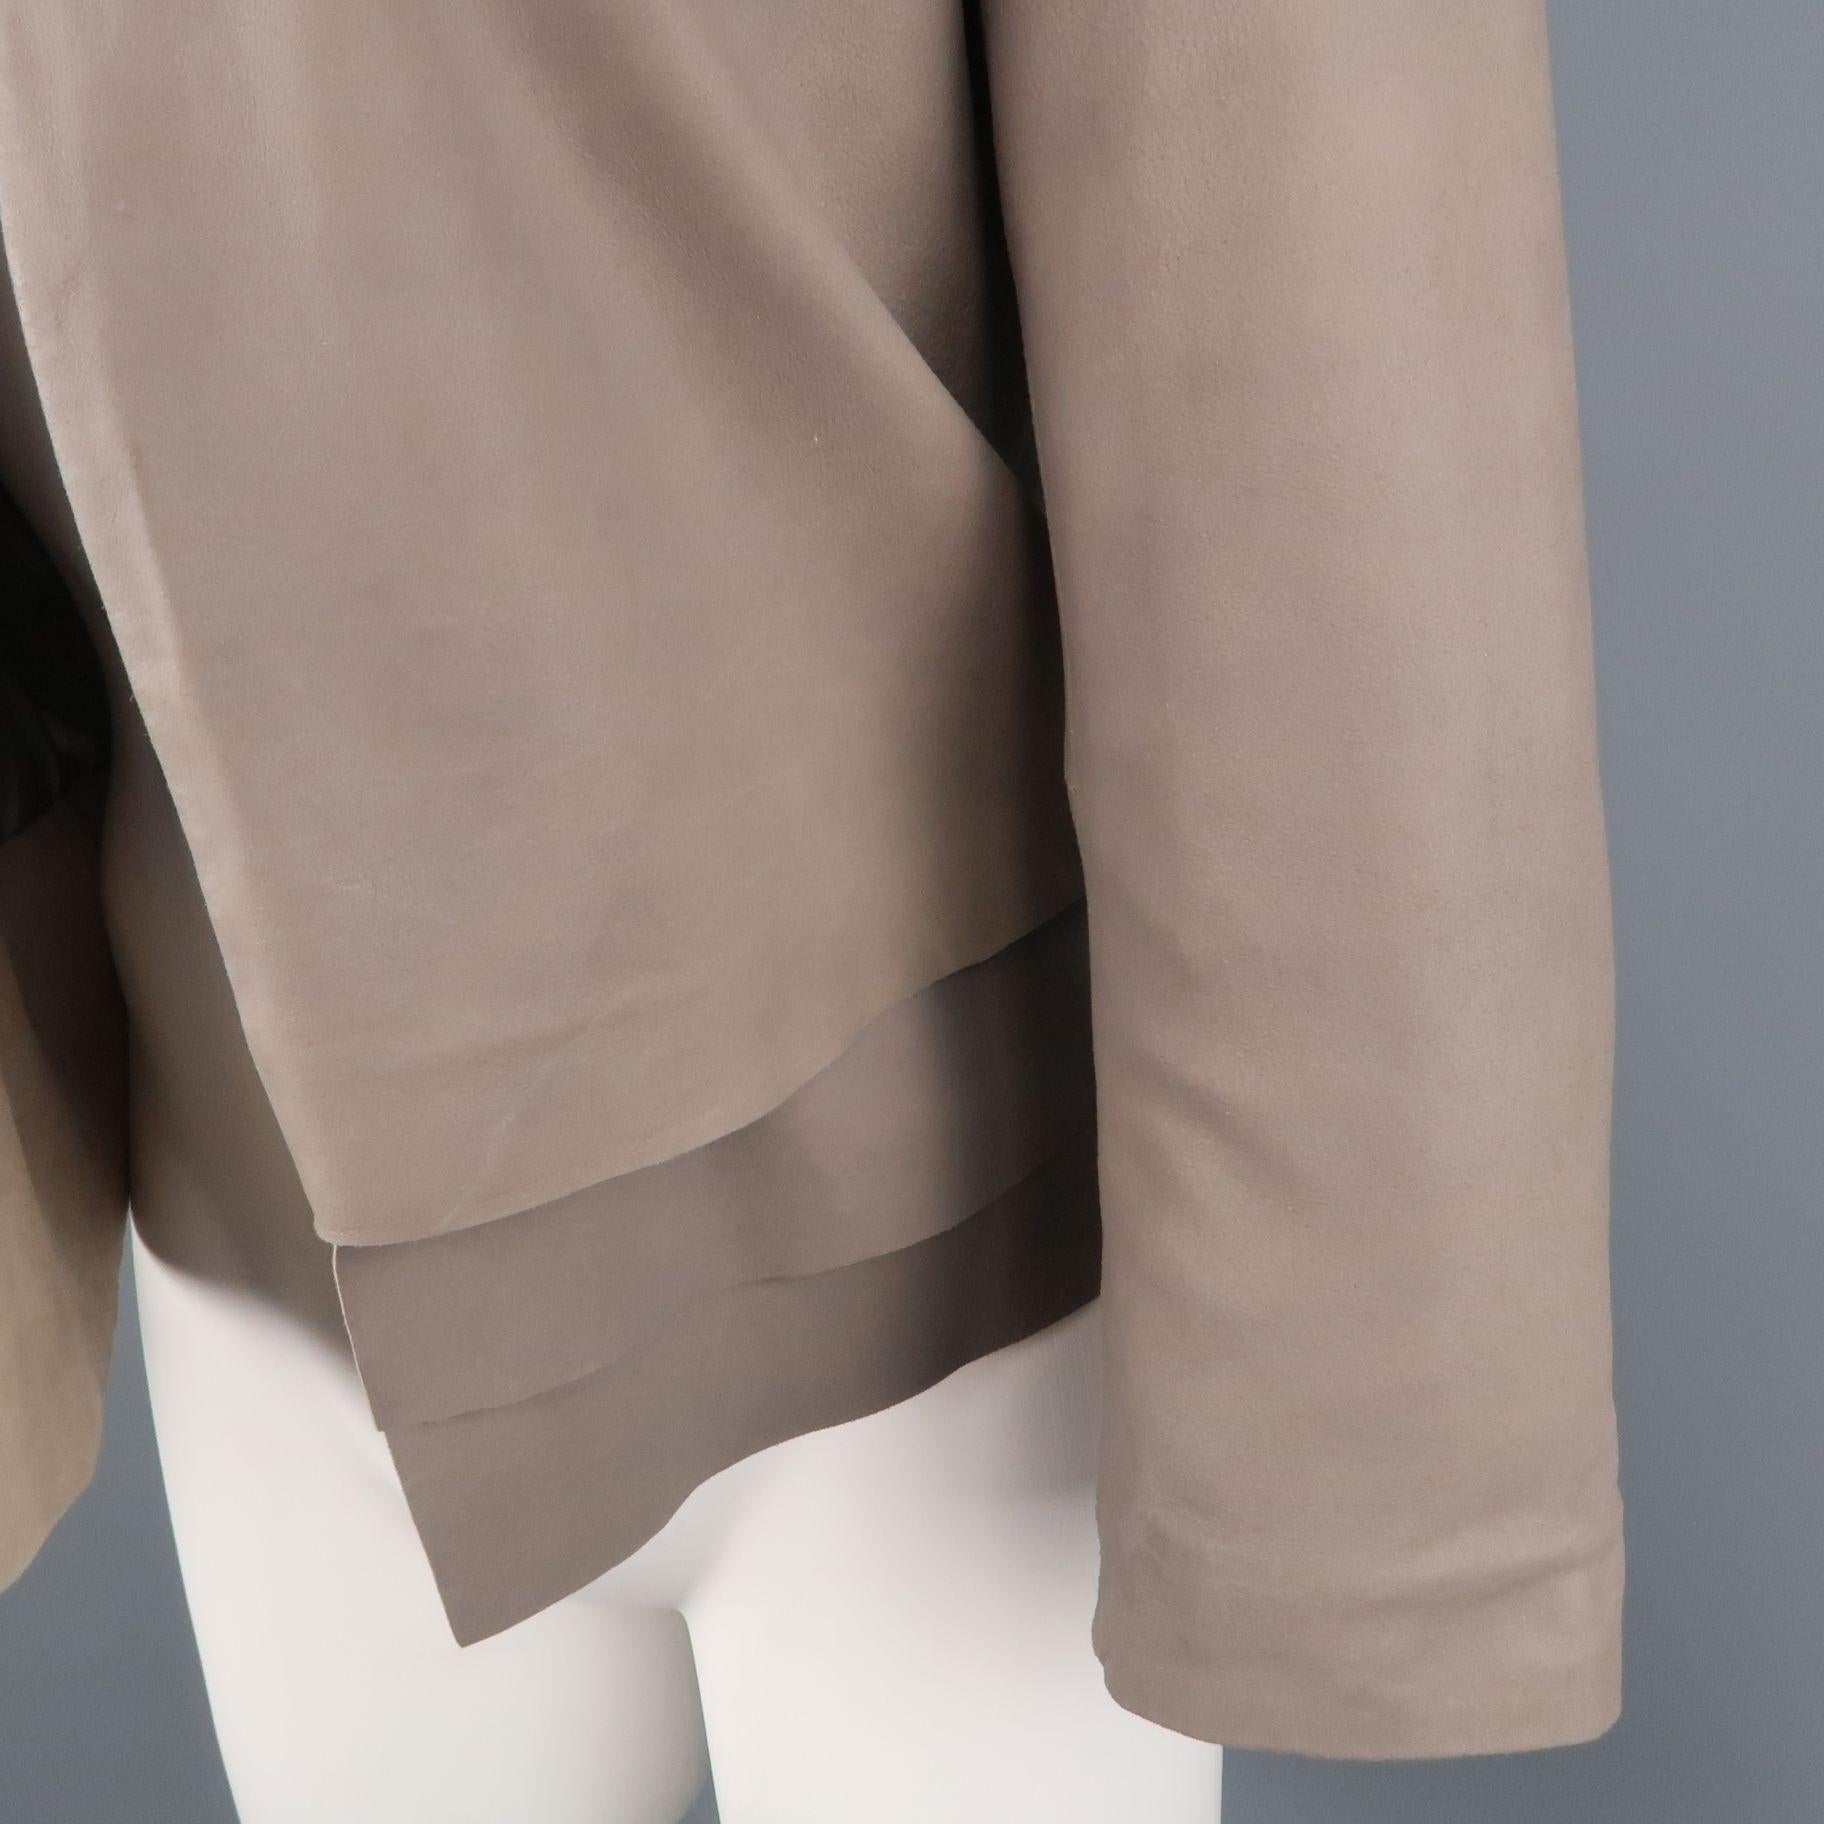 JOIE open front jacket comes in light weight taupe gray leather with a collarless round neckline, and layered hem. Fading and discolorations throughout. As-is.
 
Good Pre-Owned Condition.
Marked: XS
 
Measurements:
 
Shoulder: 13.5 in.
Chest: 34